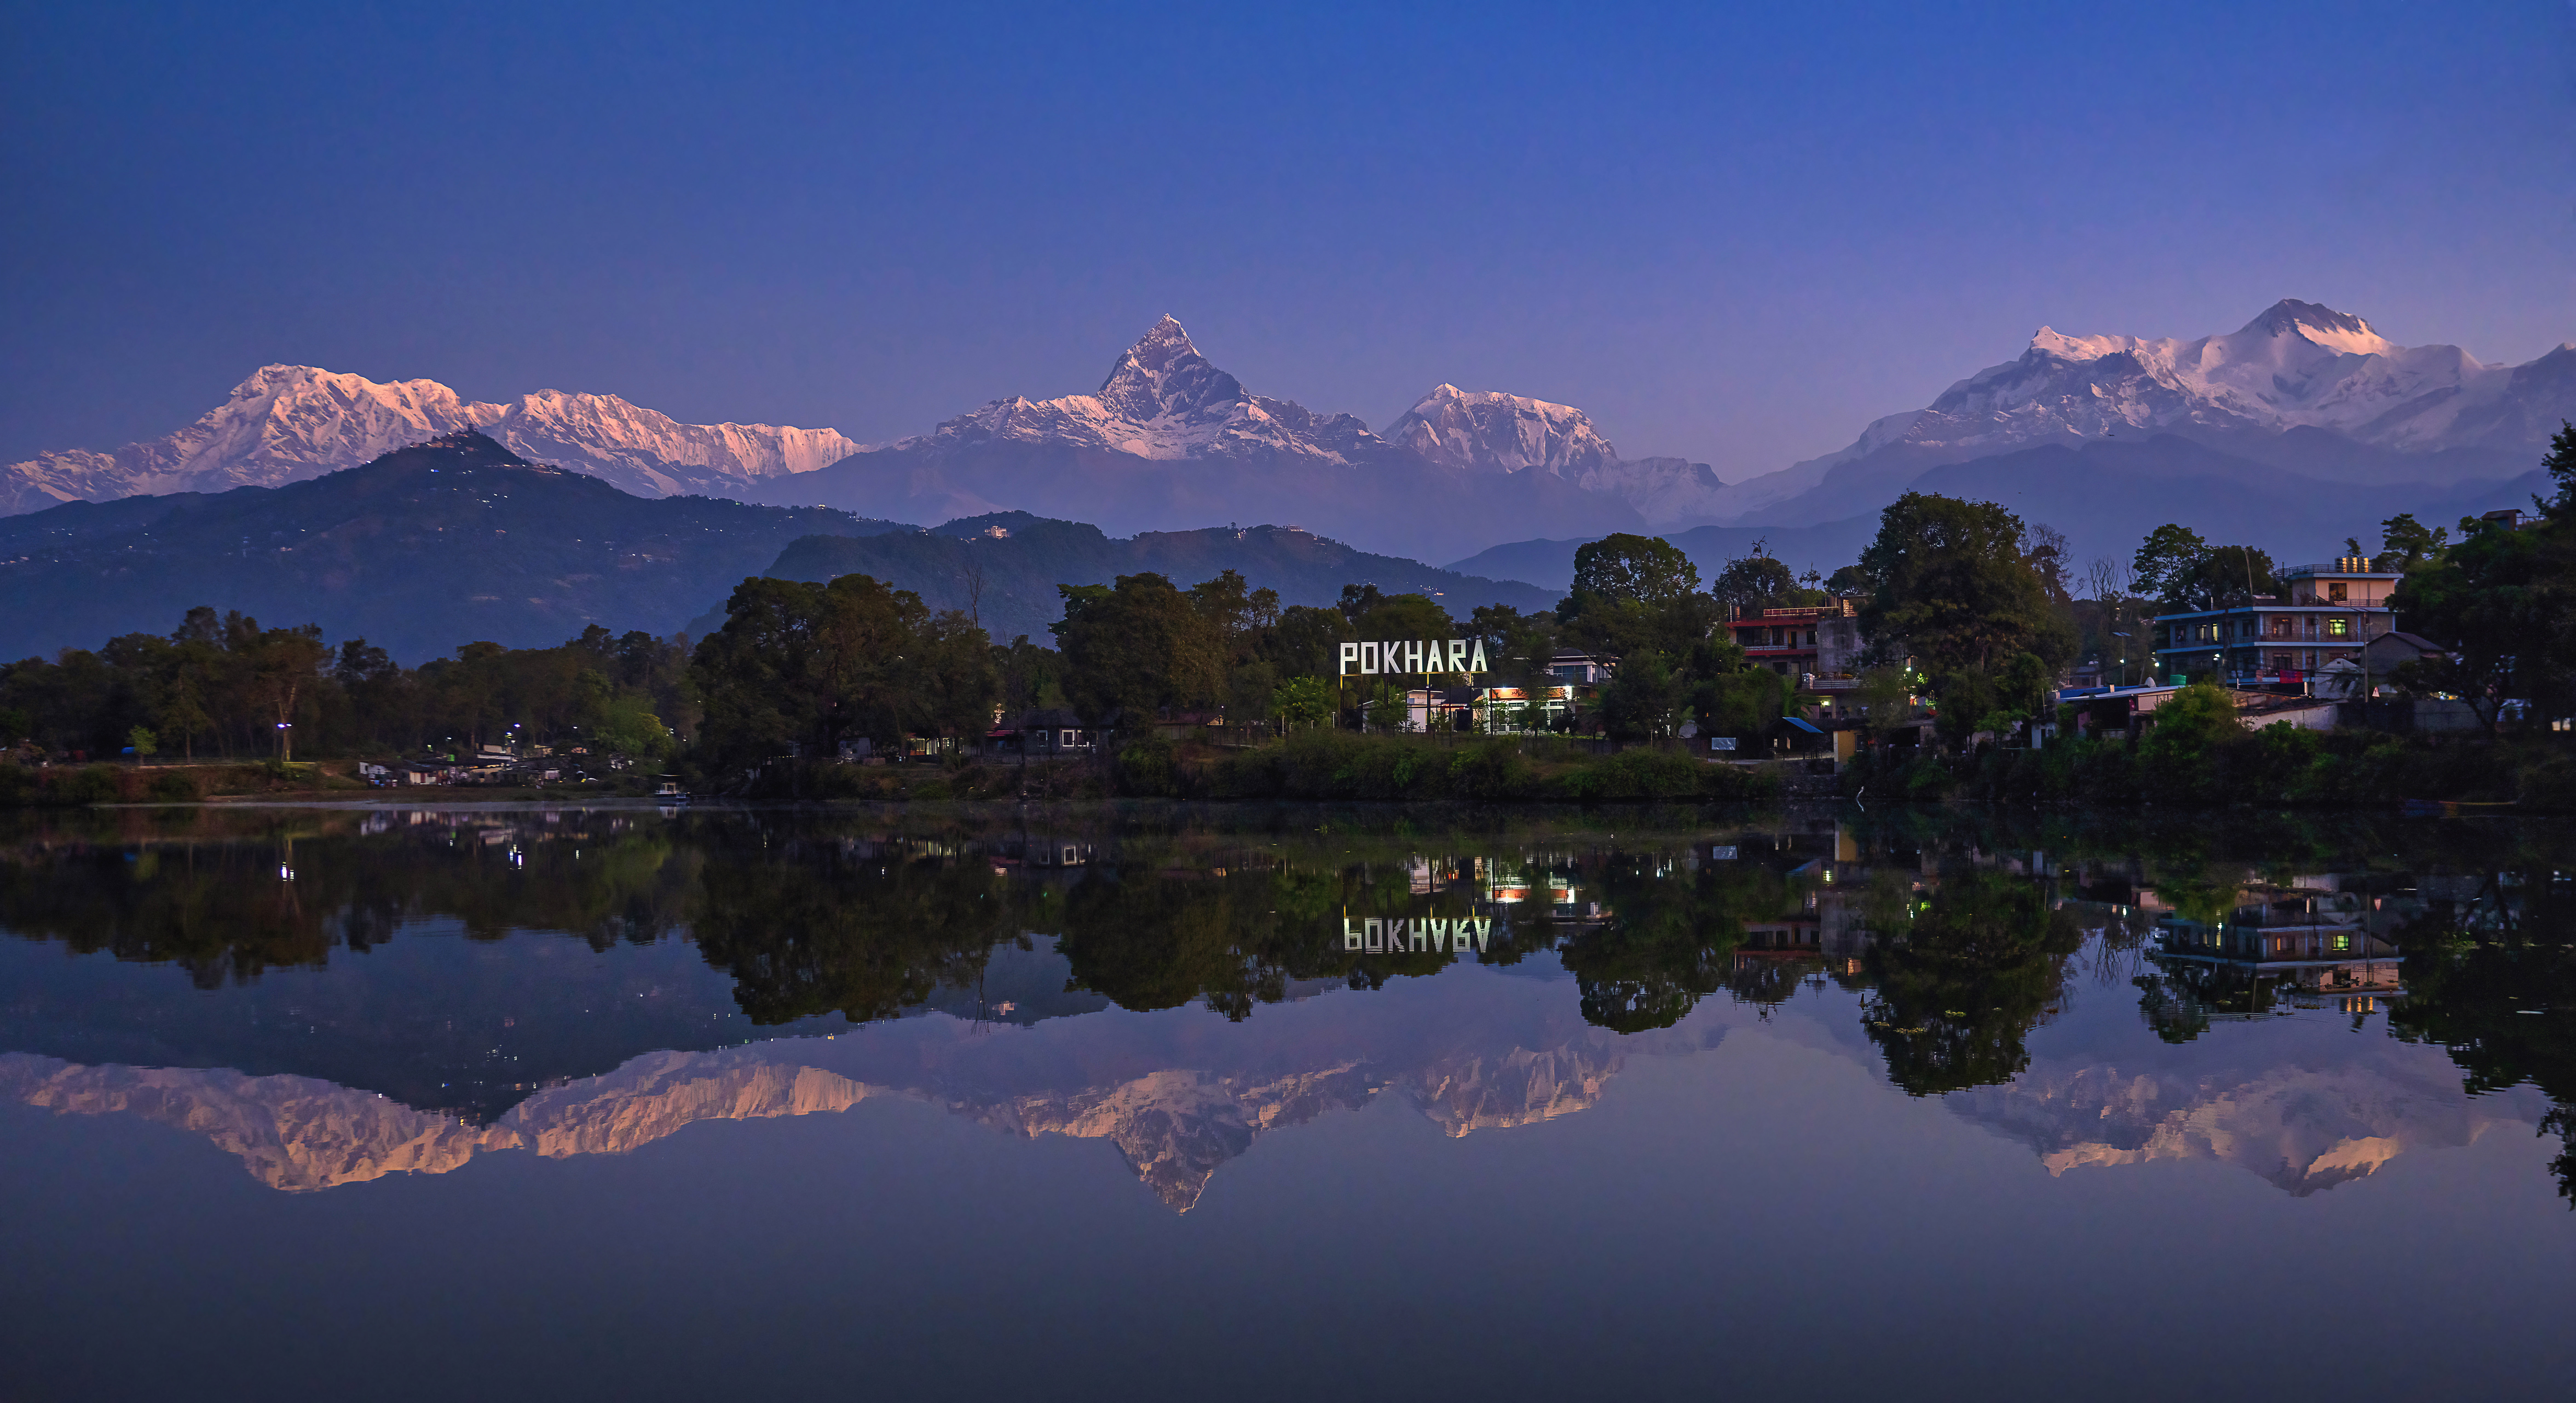 Astham to Pokhara via Suikhet/2hrs walk and 1hrs drive to Pokhara.'